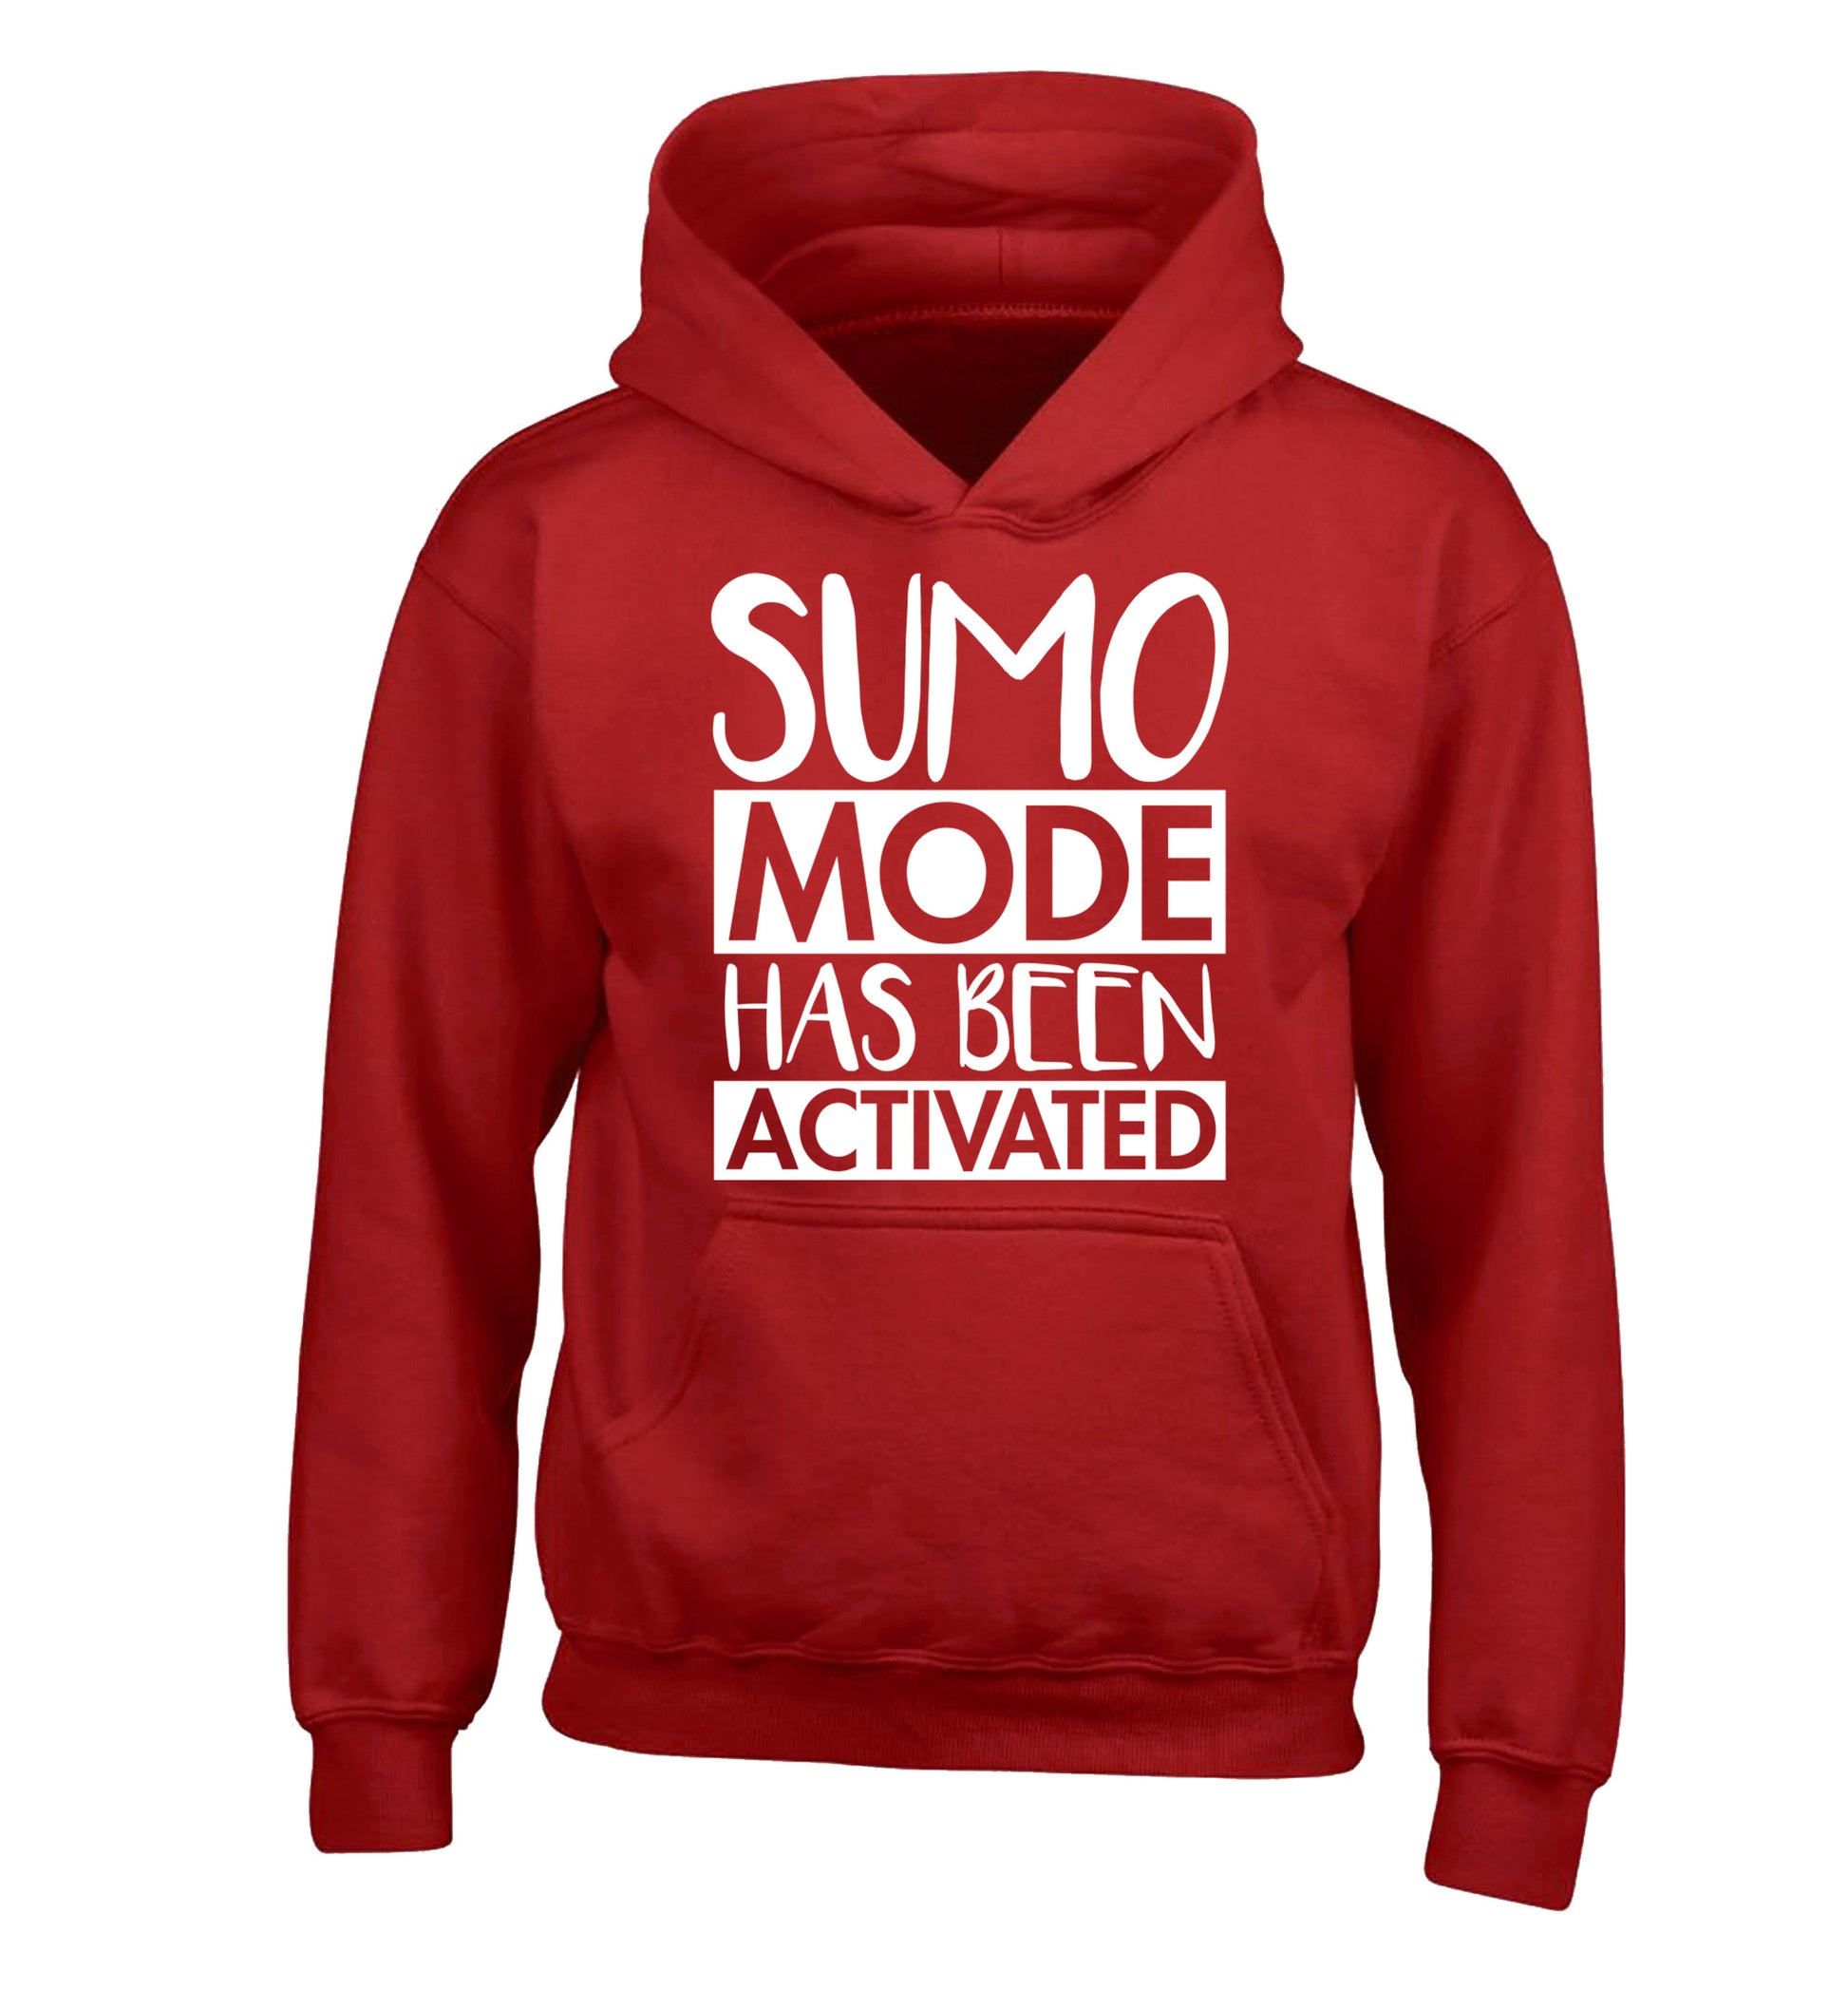 Sumo mode activated children's red hoodie 12-14 Years